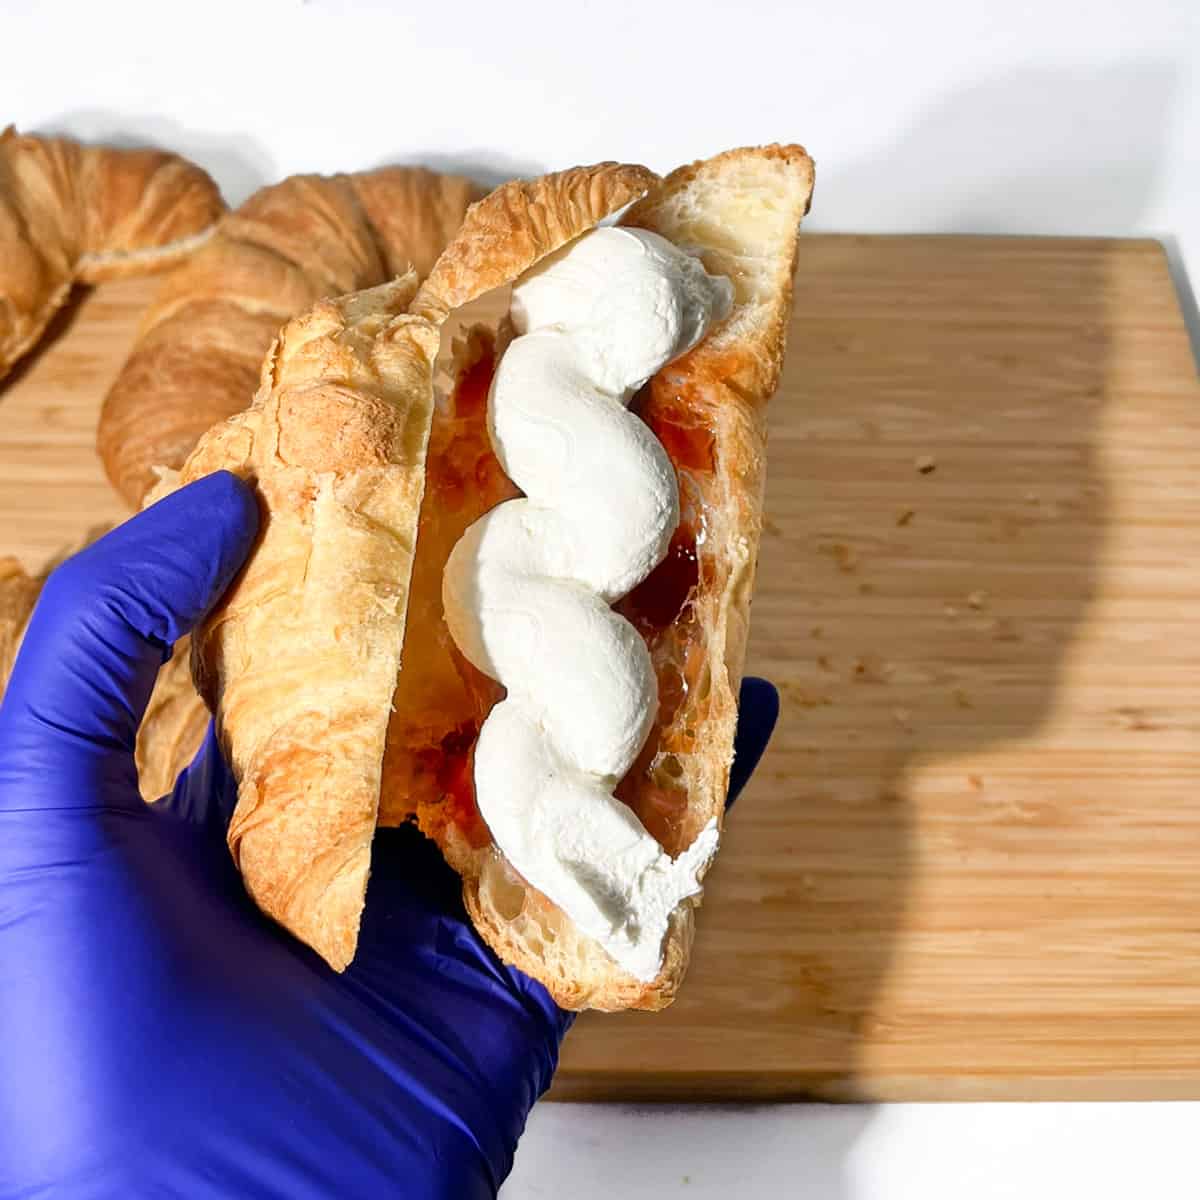 Filling the croissant with the cream.